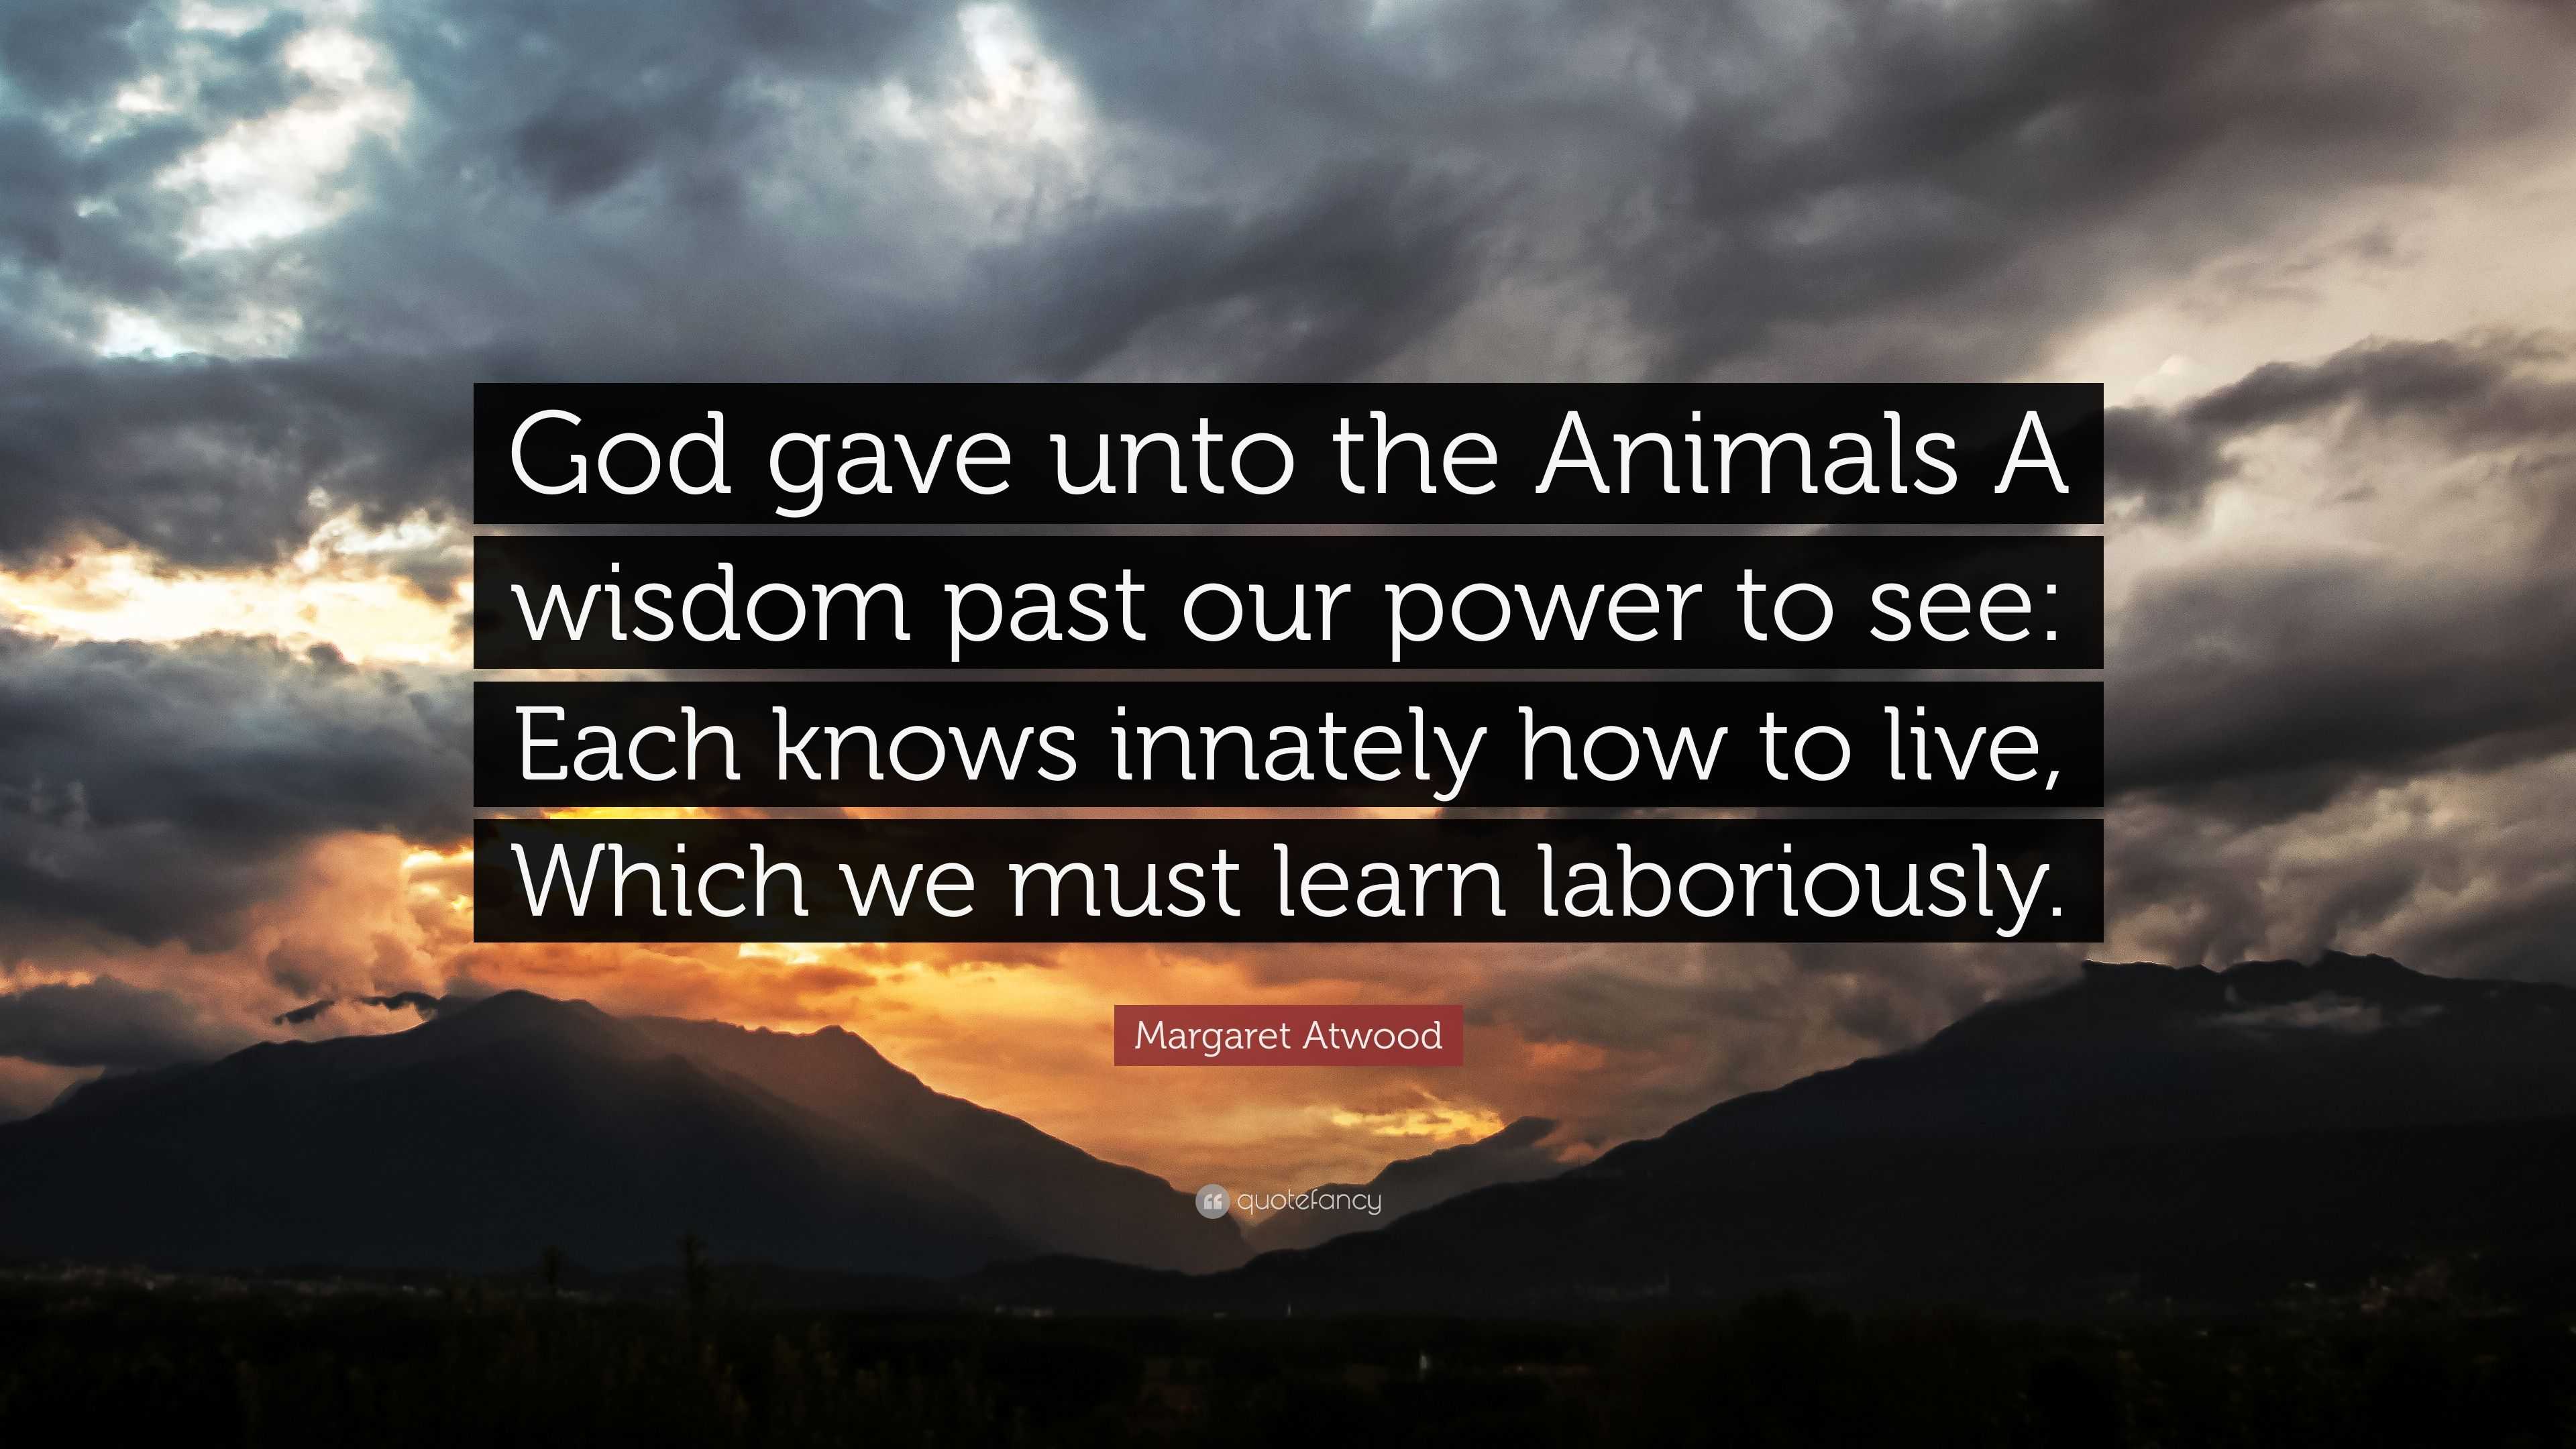 Margaret Atwood Quote: “God gave unto the Animals A wisdom past our power to  see: Each knows innately how to live, Which we must learn laborious...”